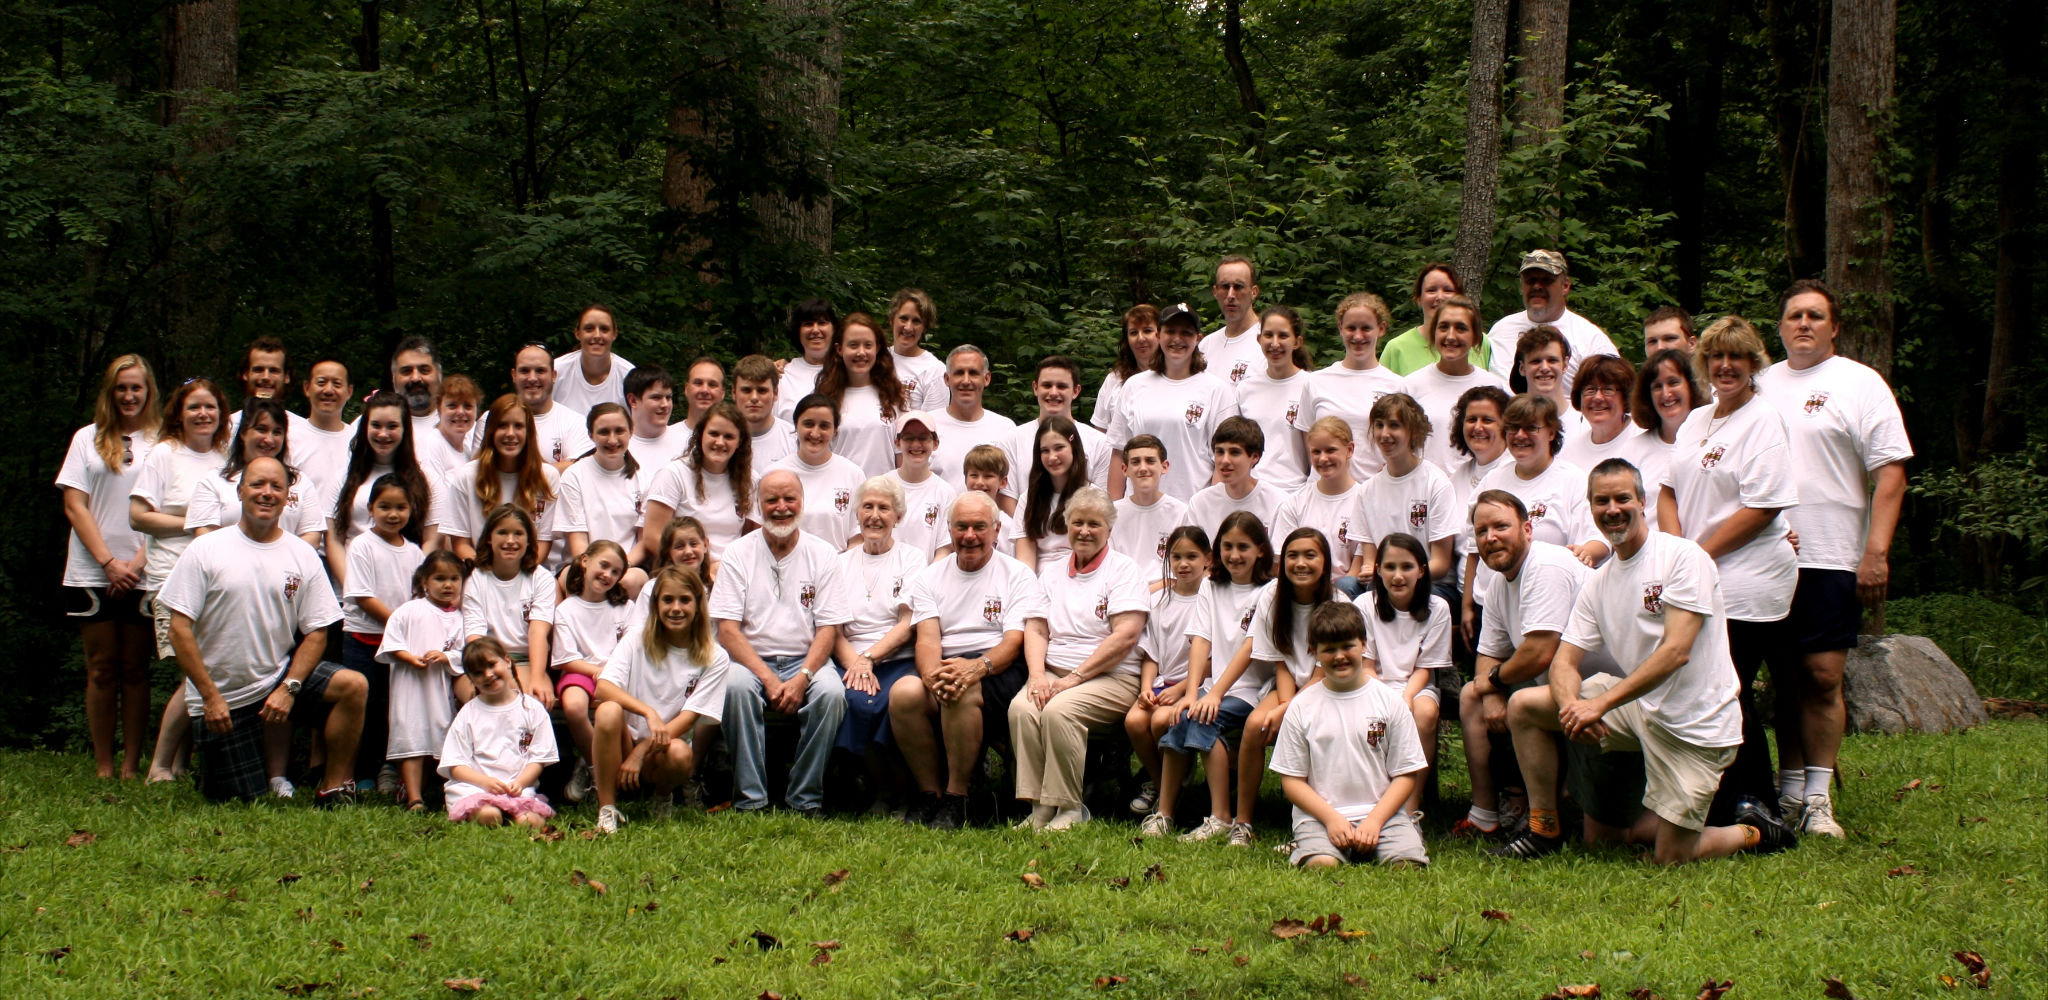 Dale, Gail, and Dennis, with their spouses and almost all of their children and grandchildren, on 17 July 2012